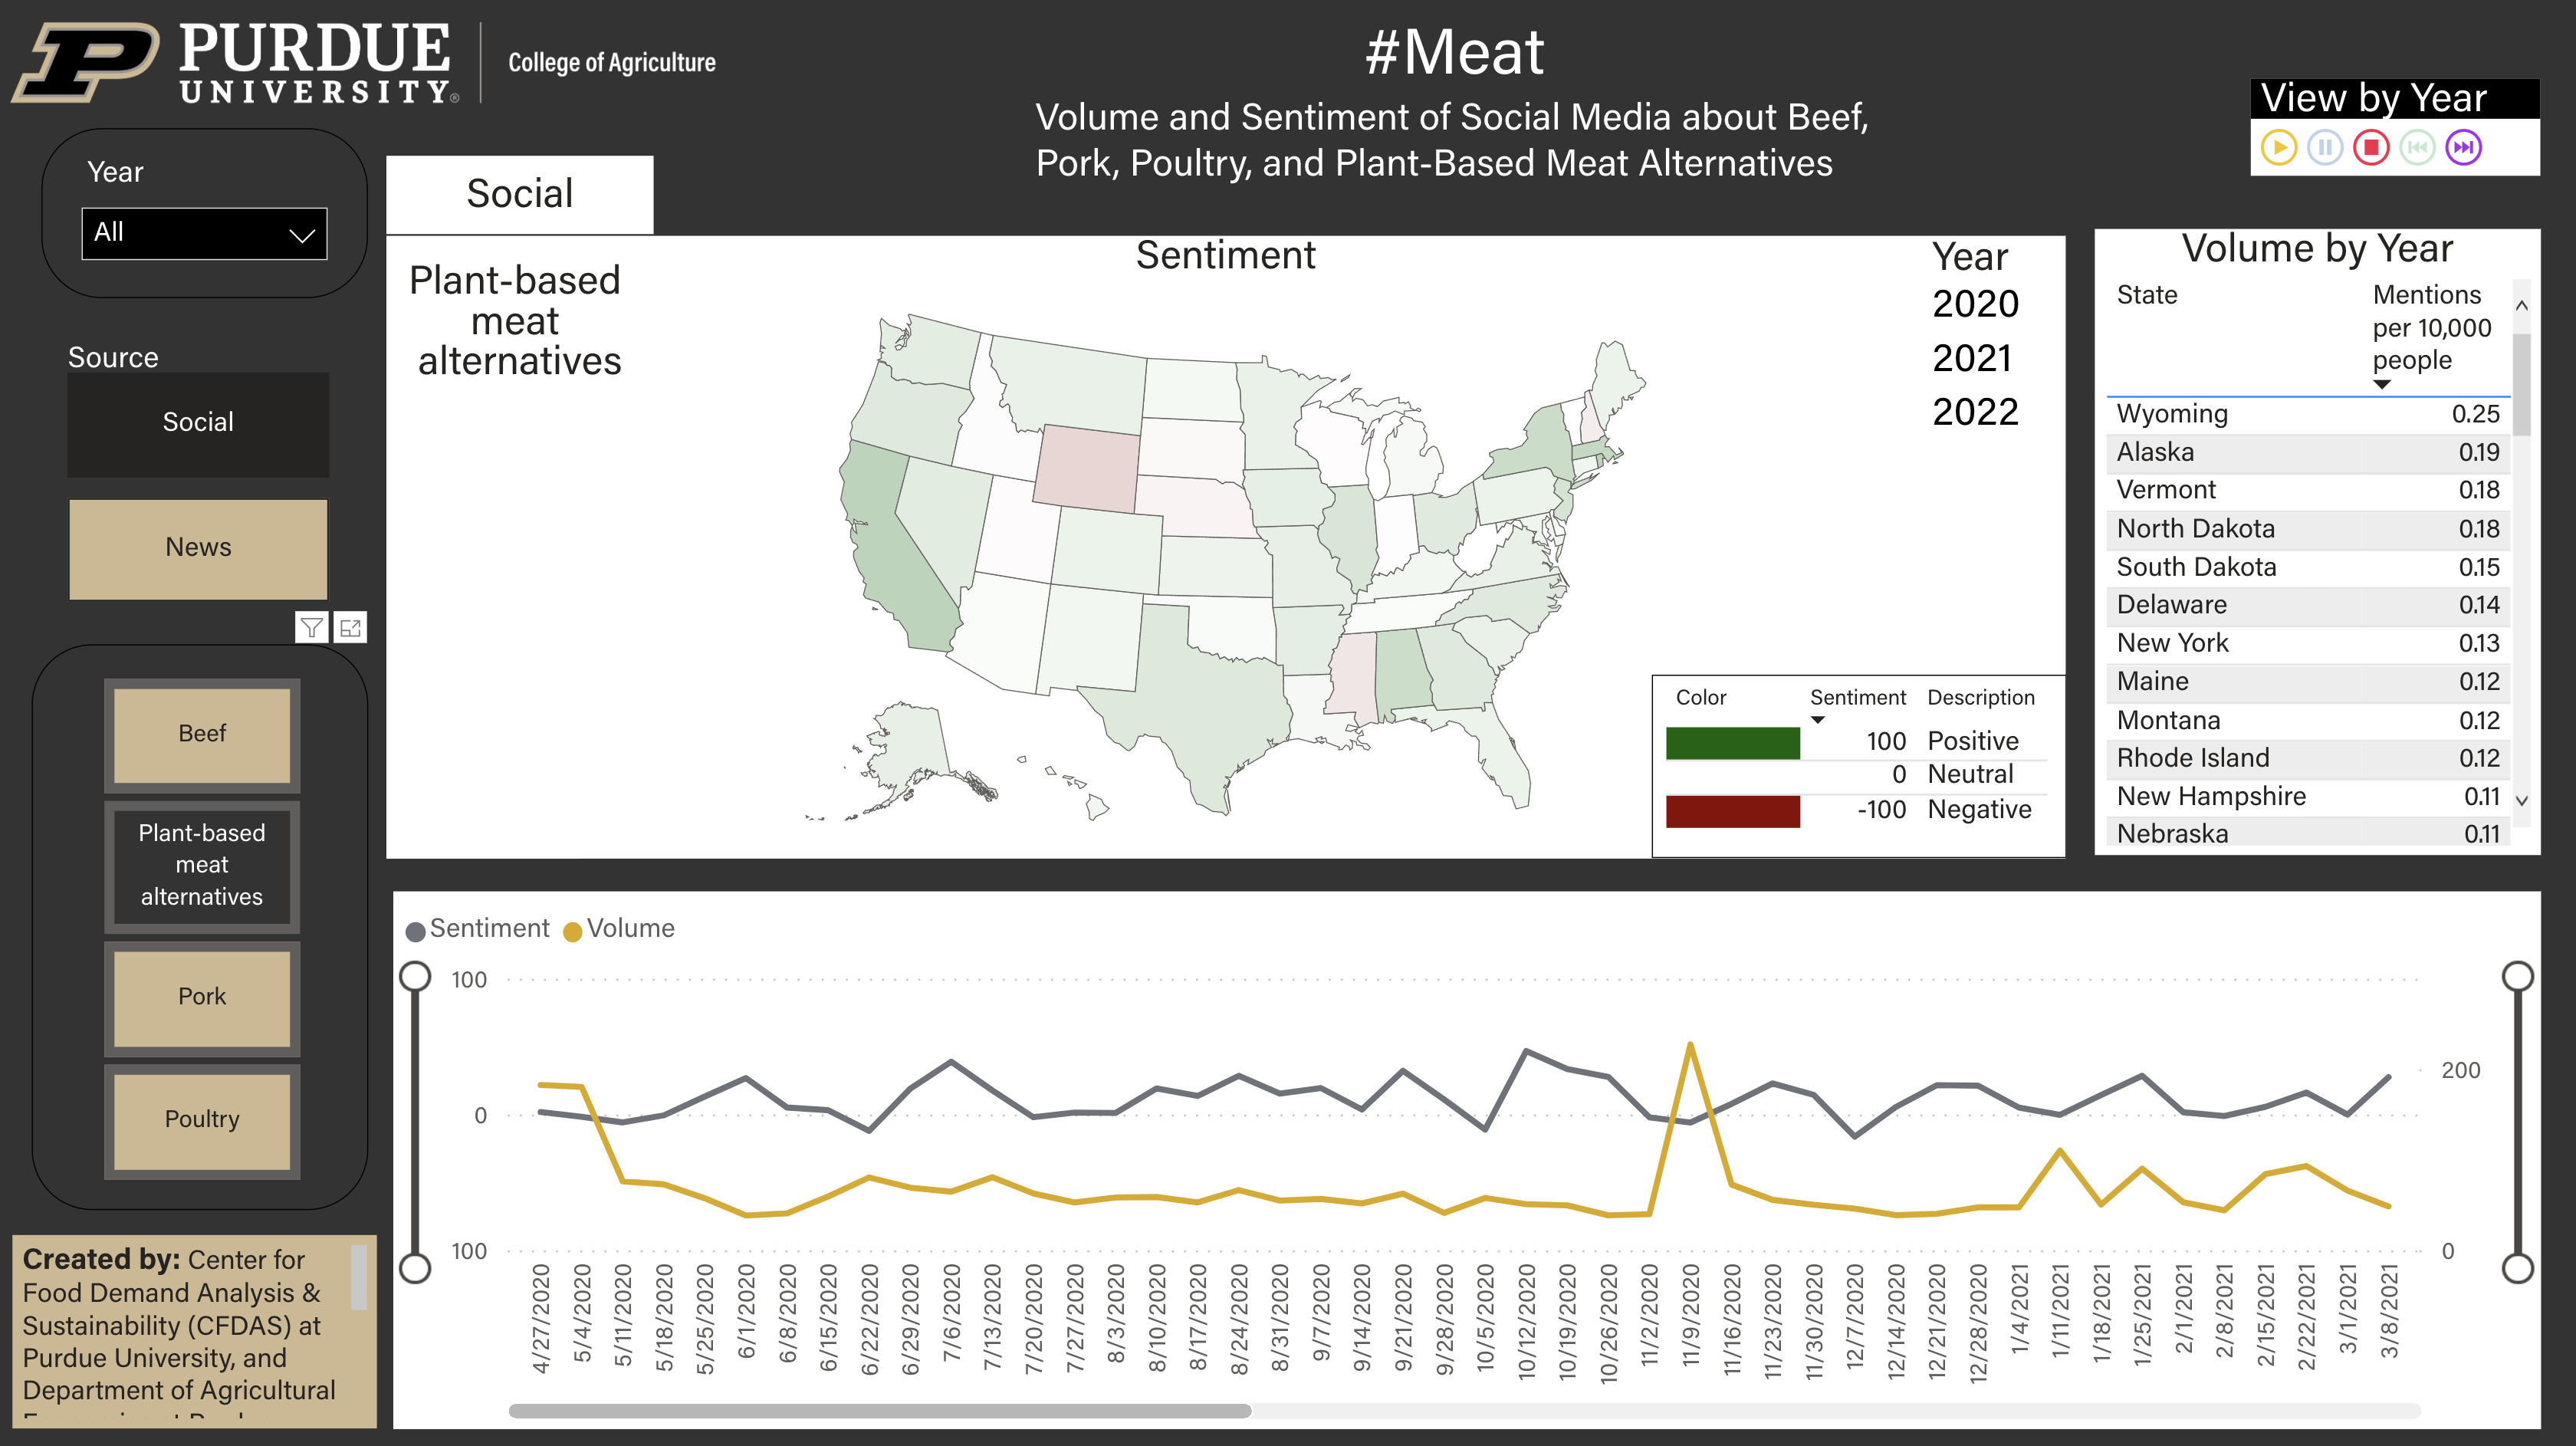 Volume and Sentiment of Social Media about Beef, Pork, Poultry, and Plant-Based Meat Alternatives 